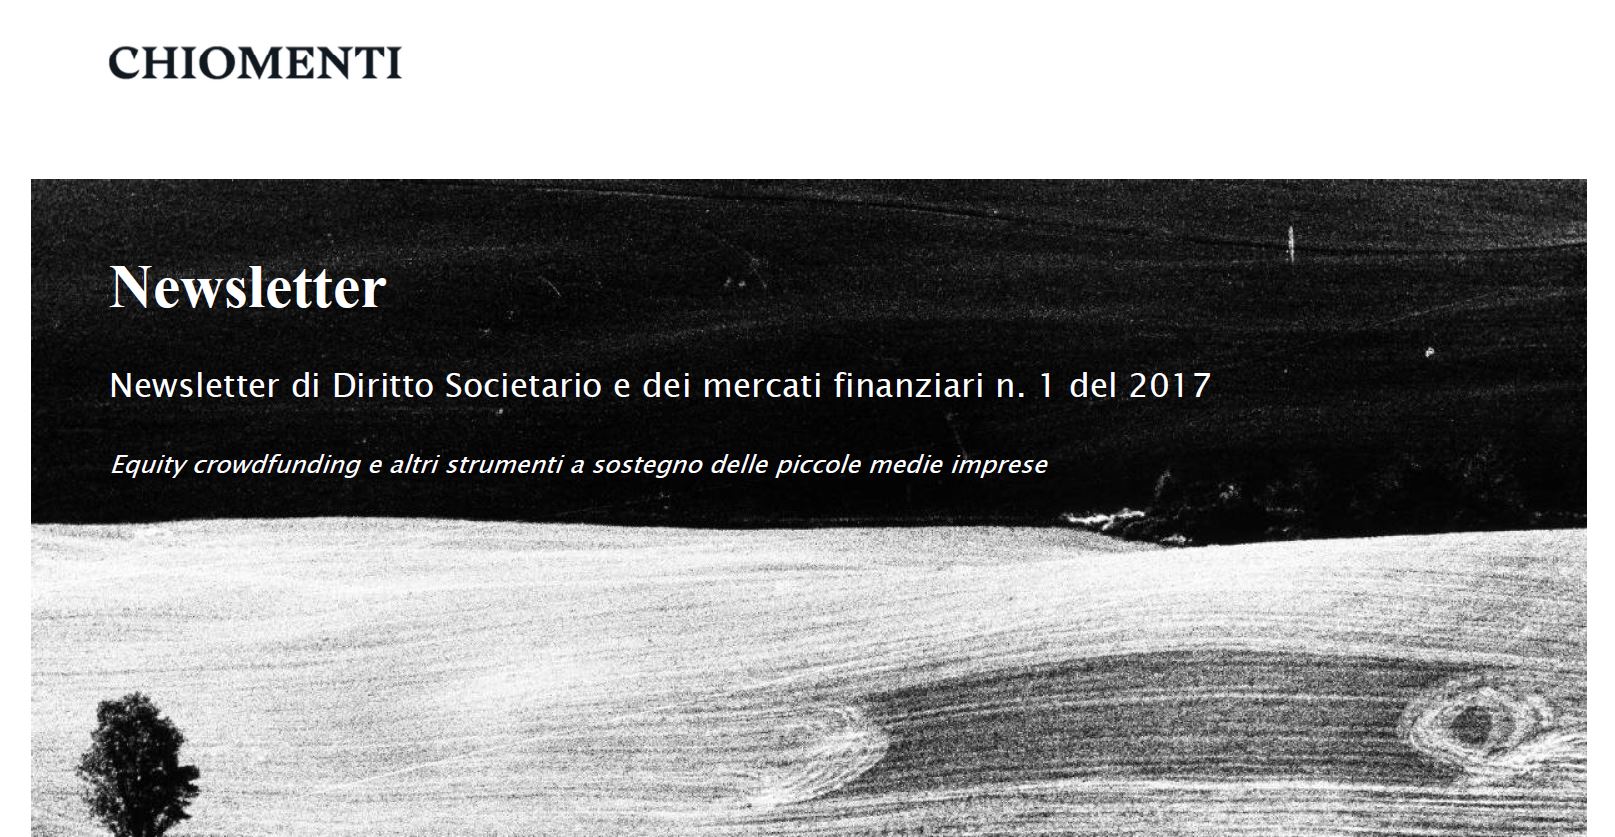 Newsletter Chiomenti n.1/2017: “The new tax regime applicable to investments made by managers and employees through the grant of enhanced economic rights (i.e., carried interest)”